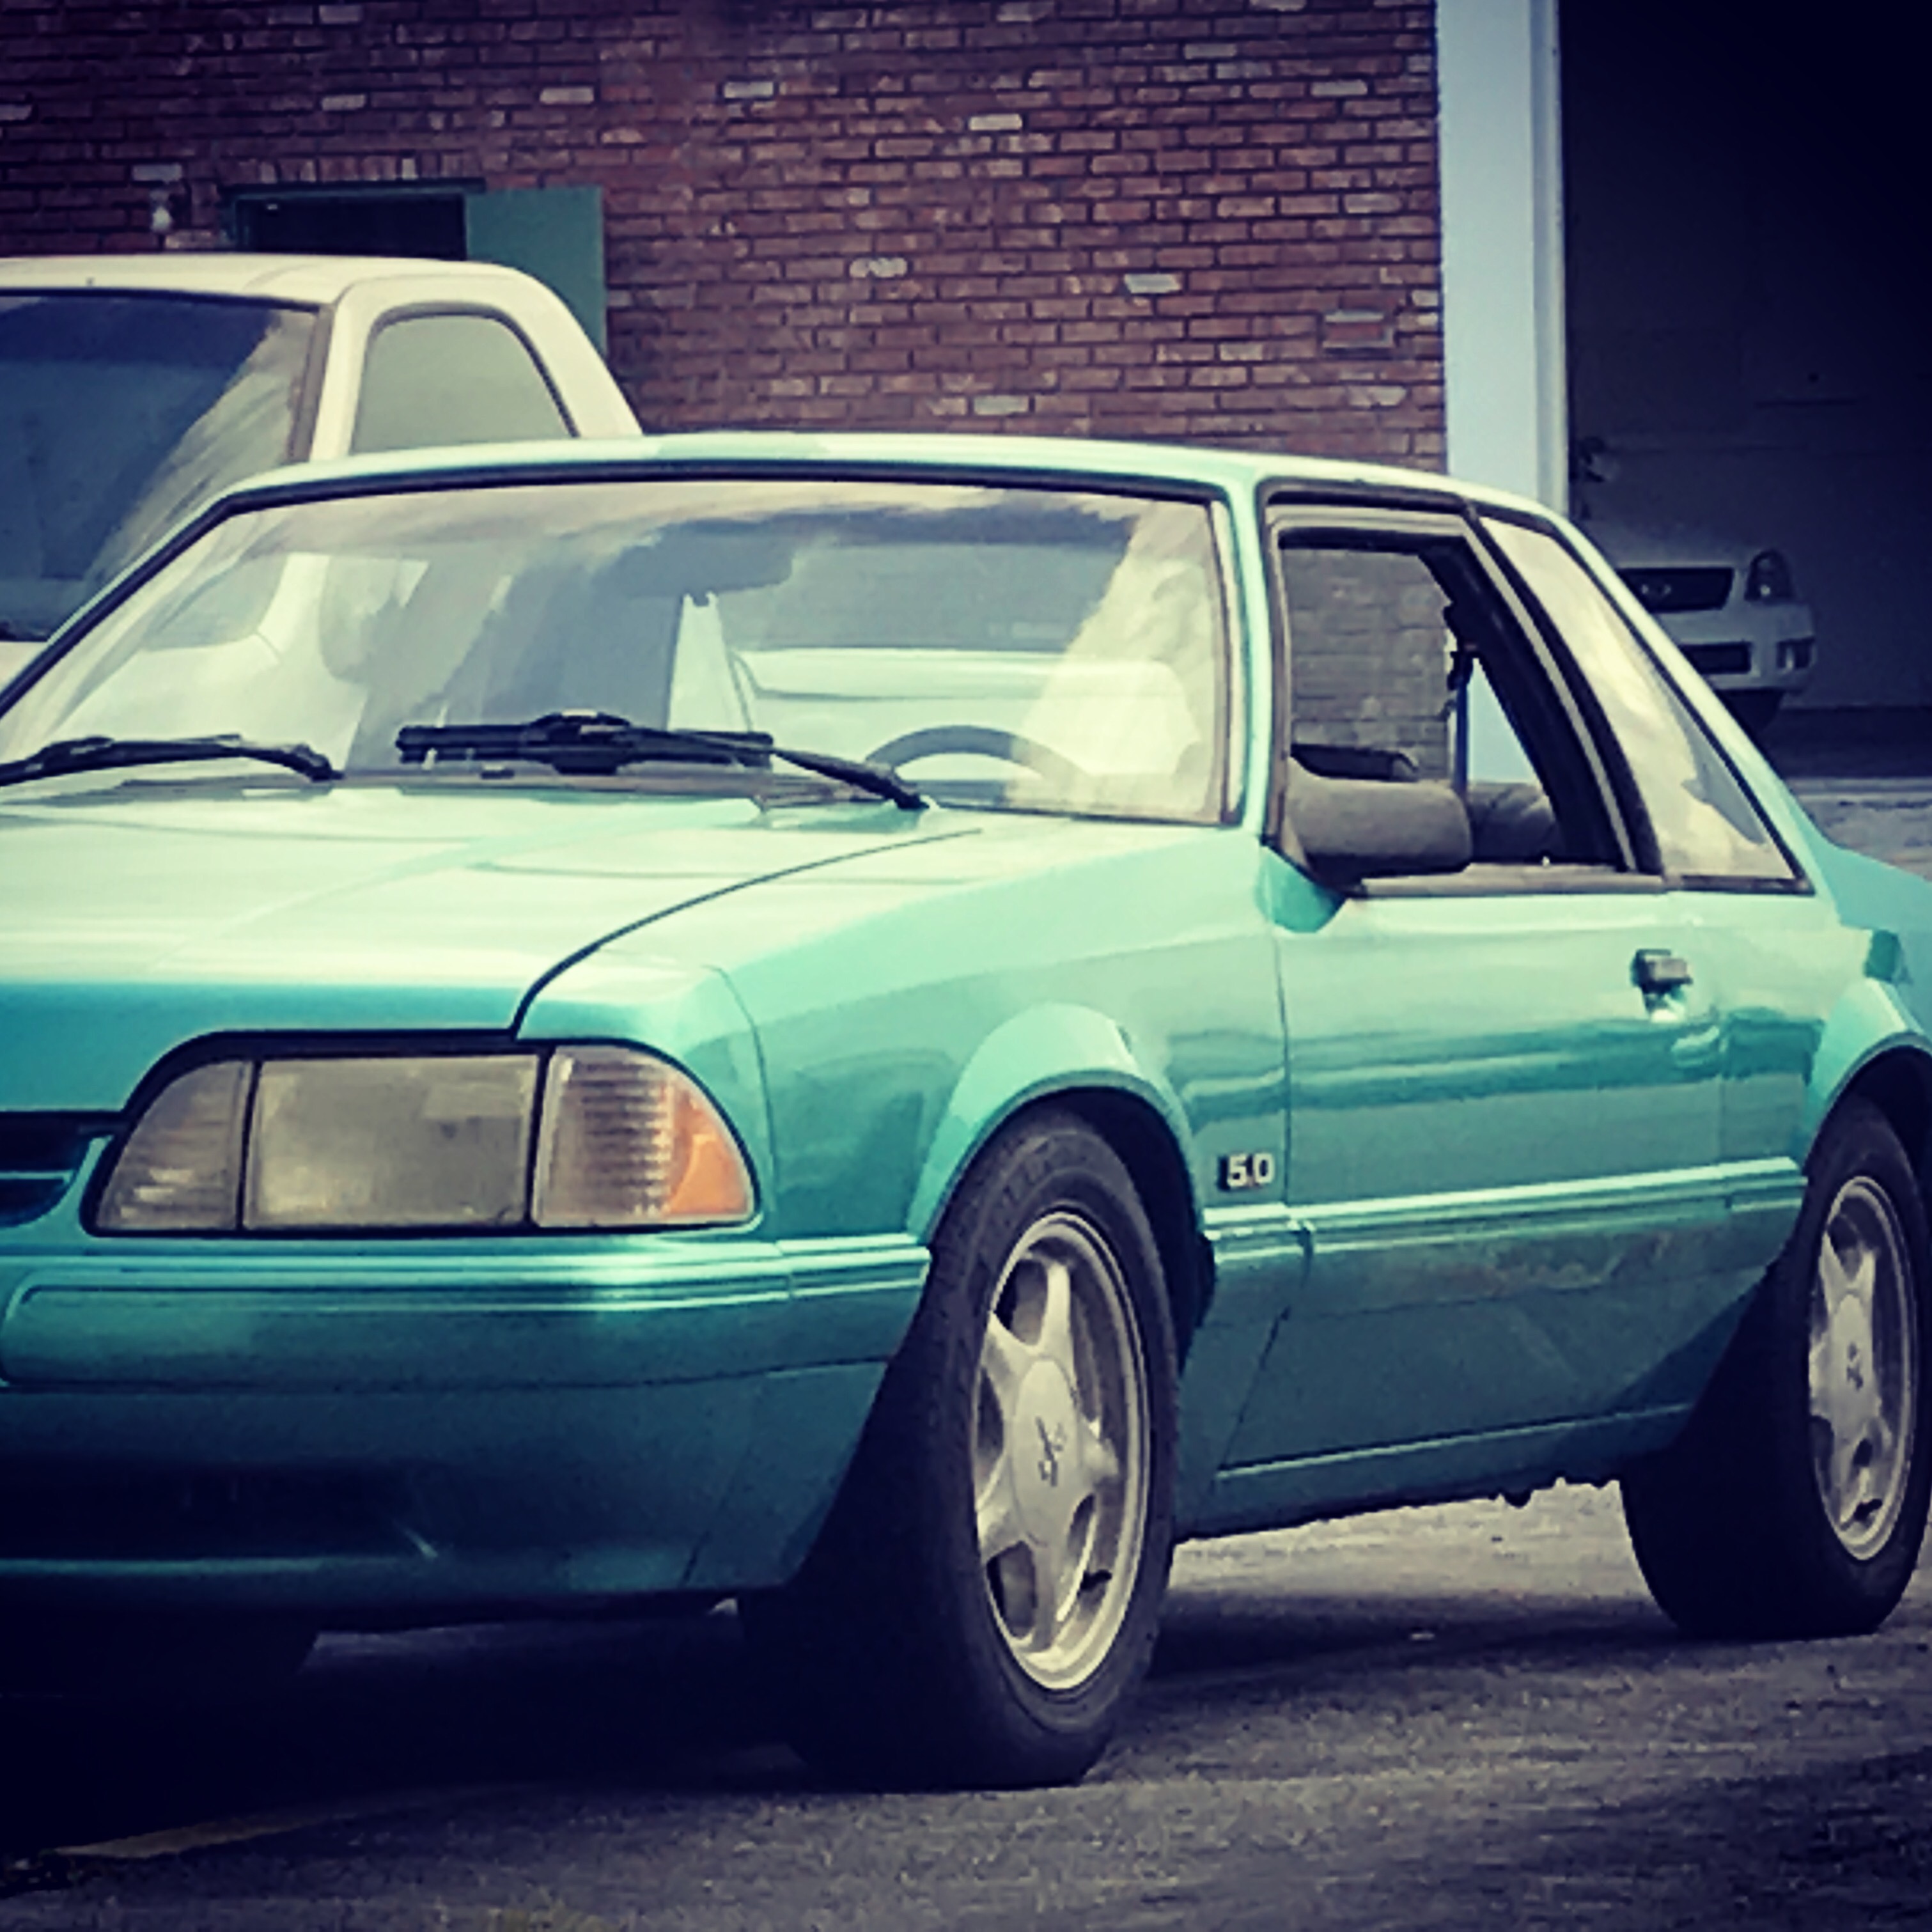 Twin 1993 mustang lx coupes